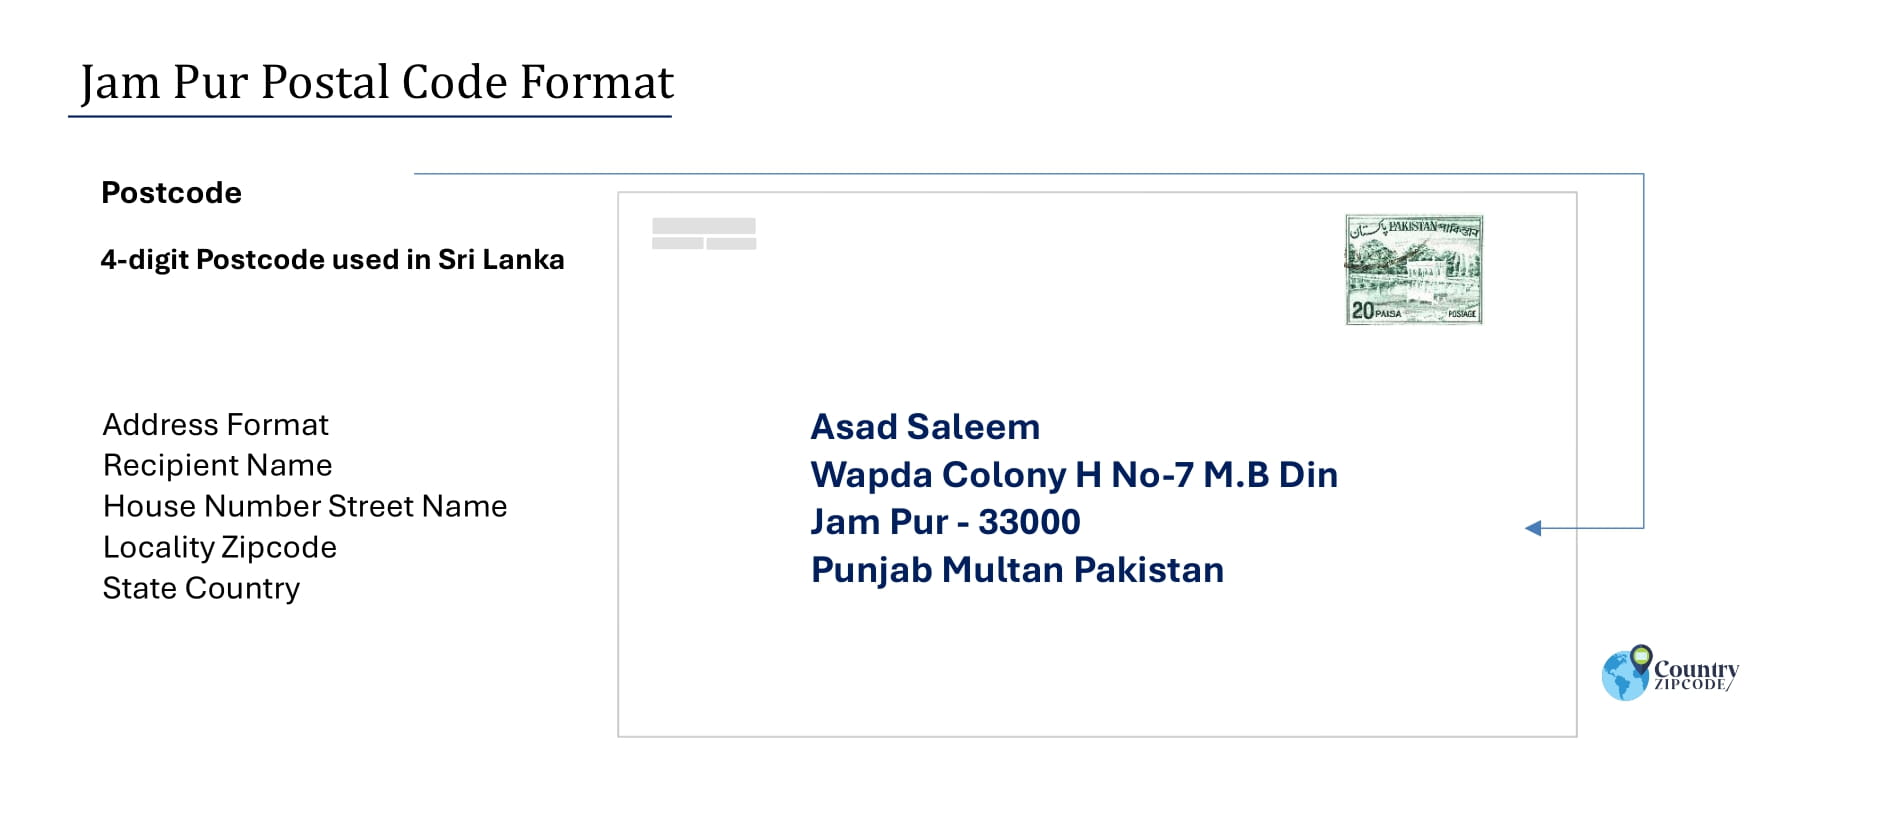 Example of Jam Pur Pakistan Postal code and Address format